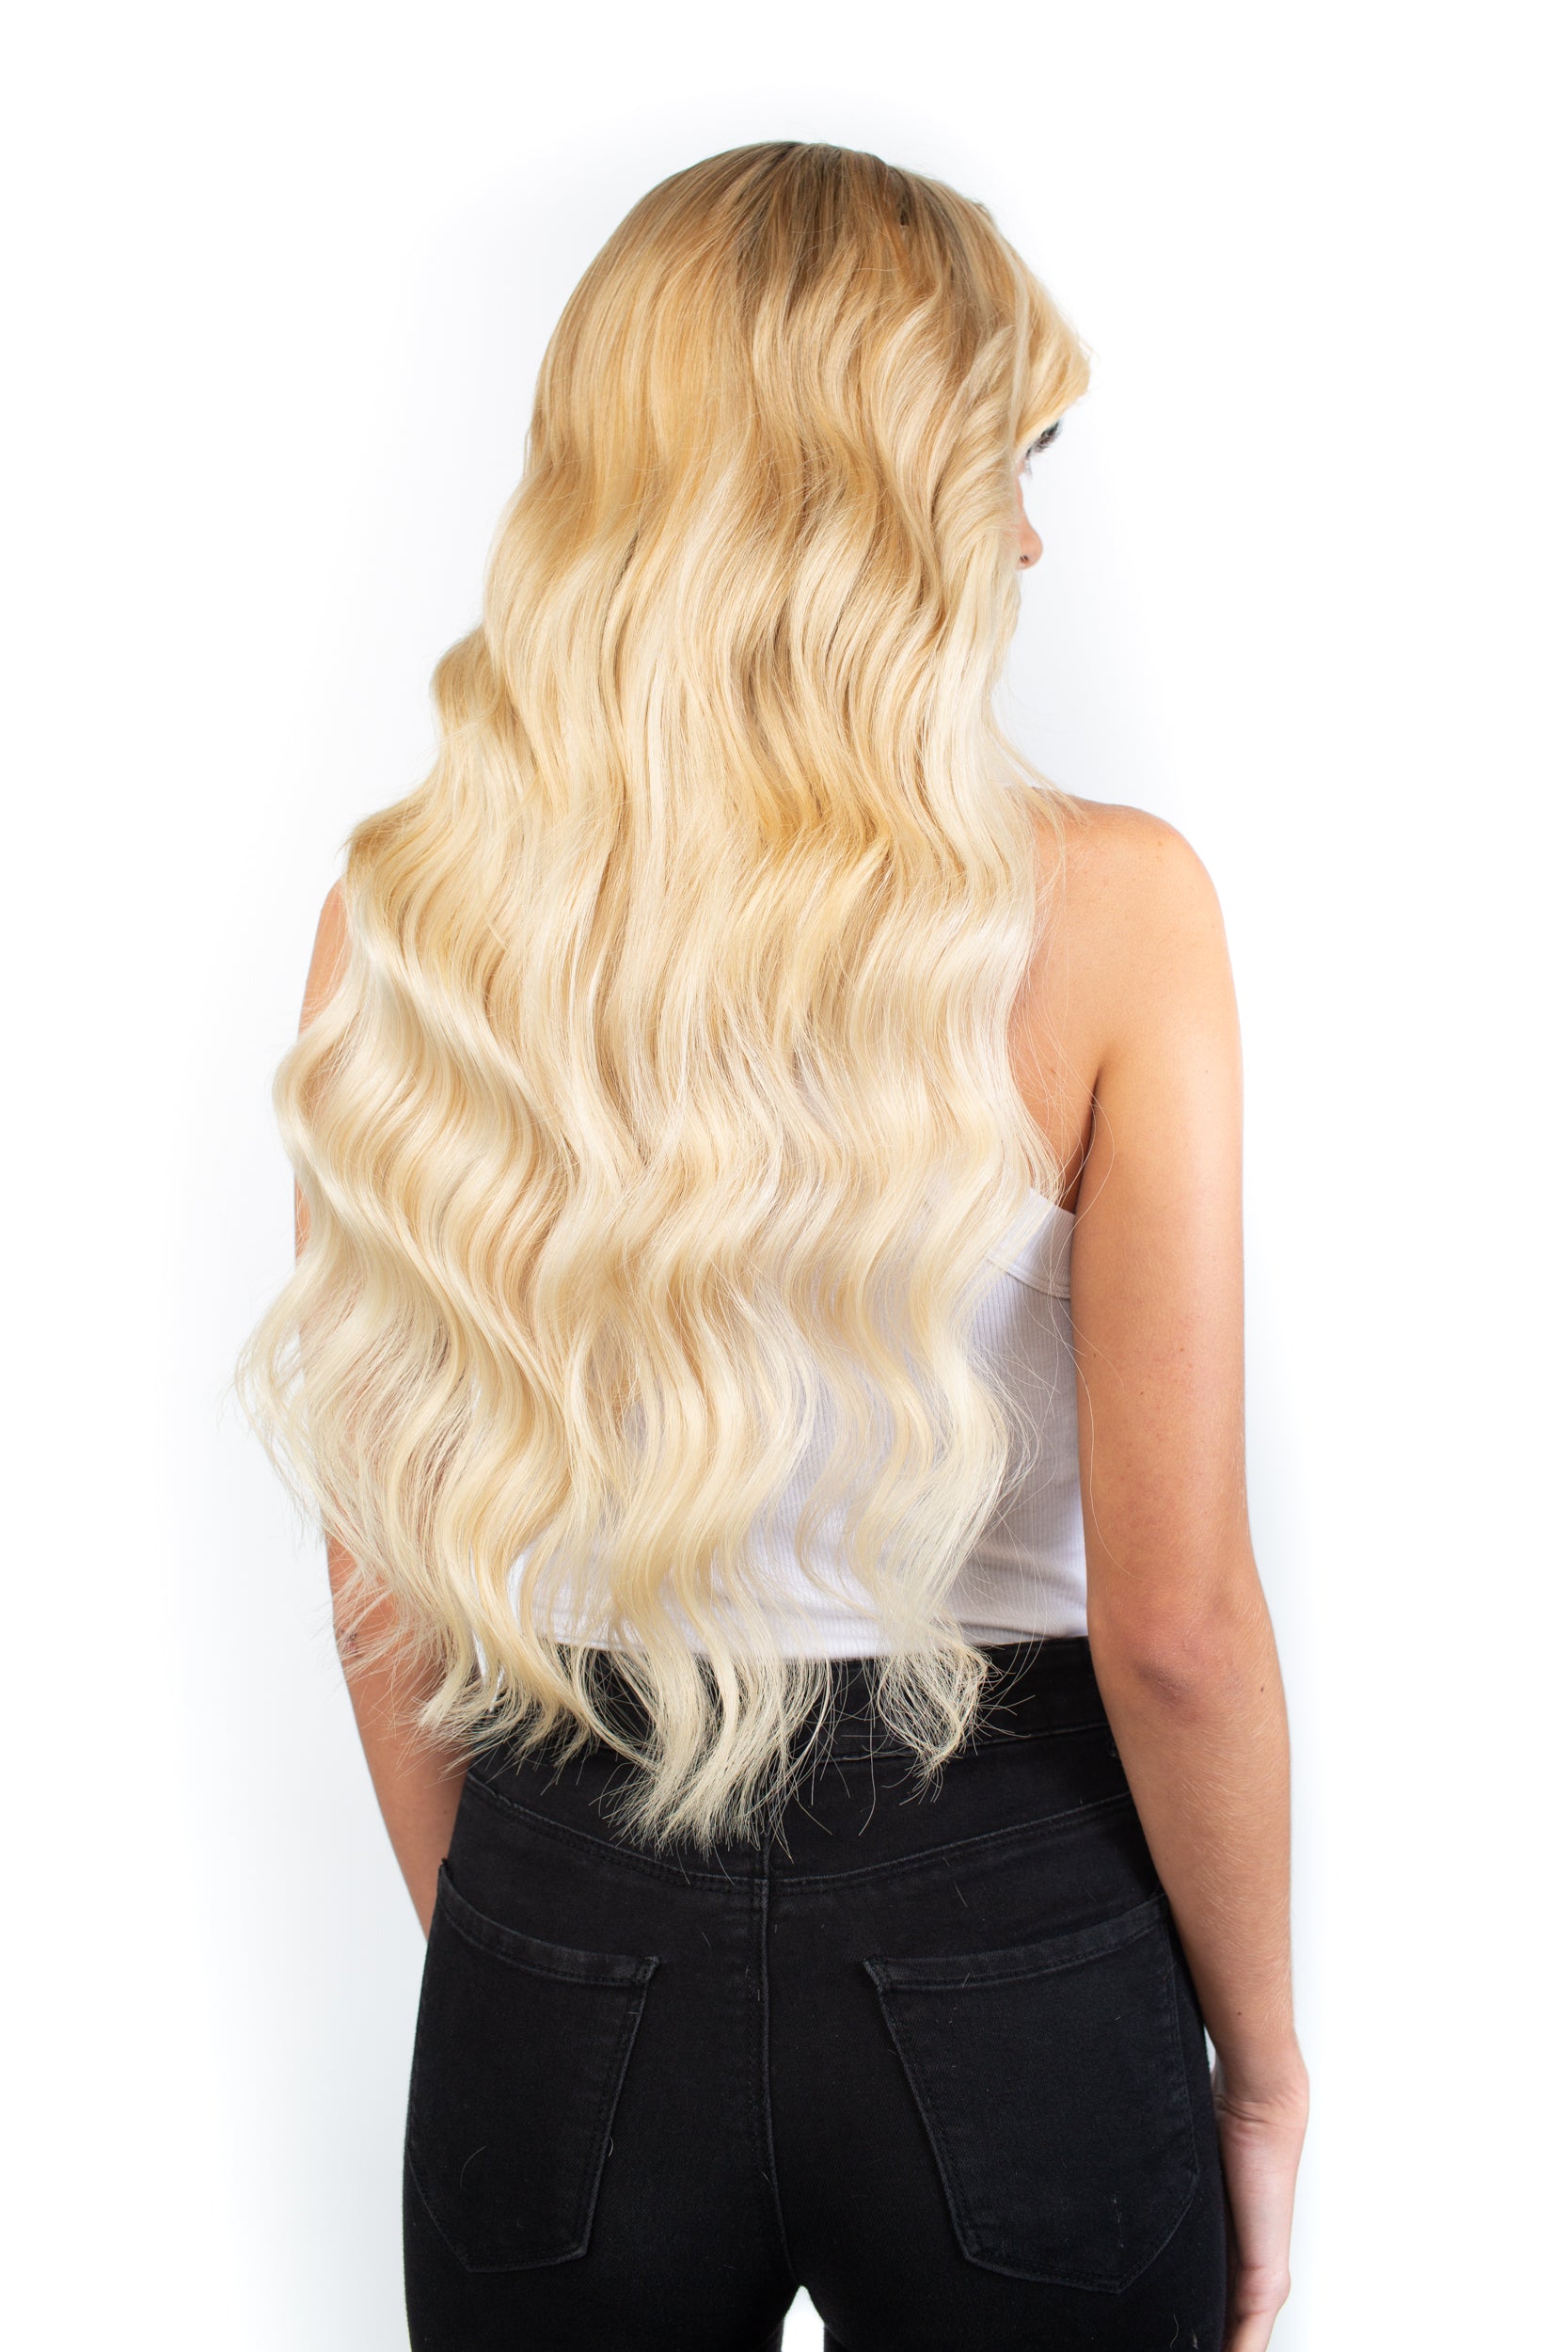 14" Bright Blonde Clip-In Hair Extensions